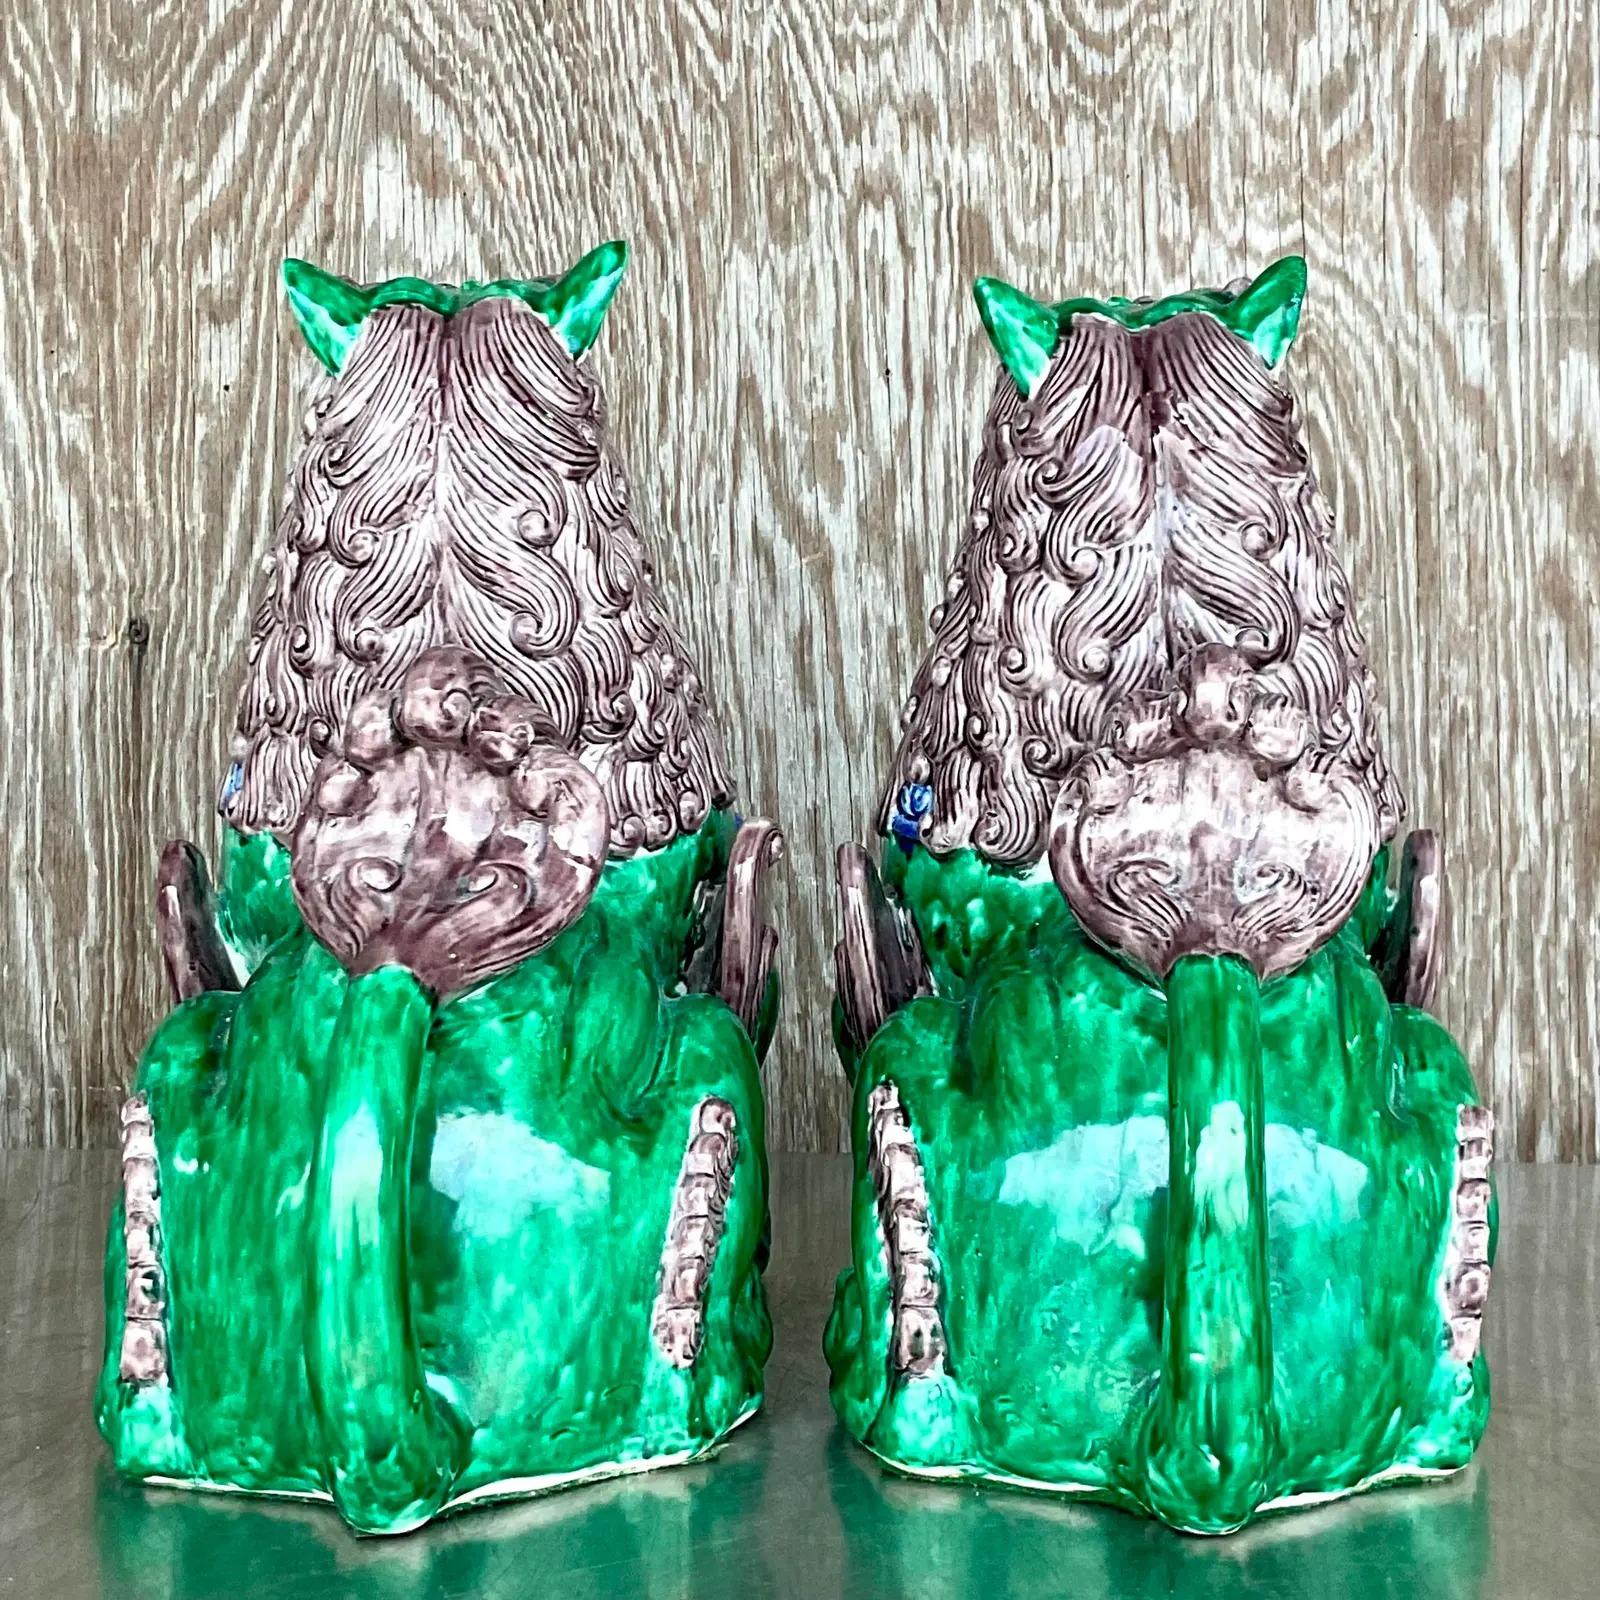 A fabulous pair of vintage Asian foo dogs. A chic glazed ceramic in bright clear colors. Two expressions add to the charm. Acquired from a Palm Beach estate.